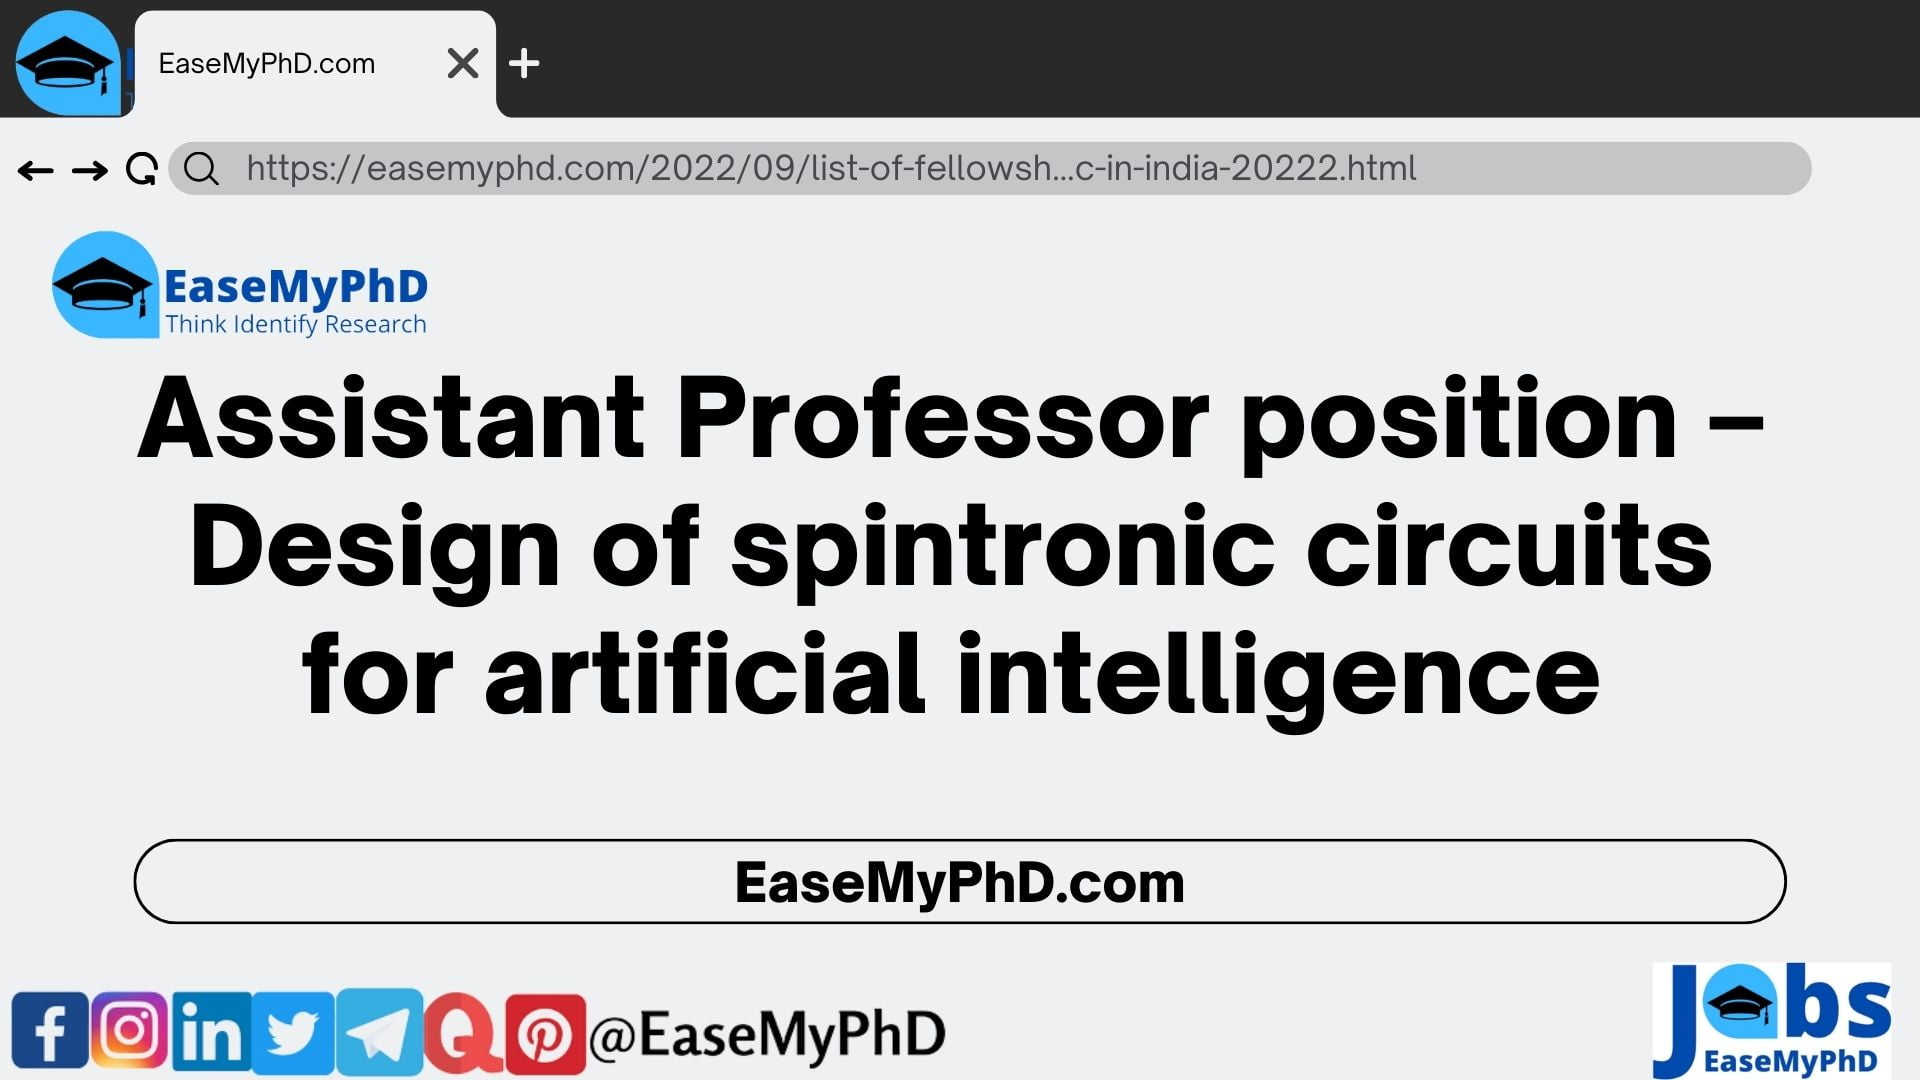 Assistant Professor position – Design of spintronic circuits for artificial intelligence